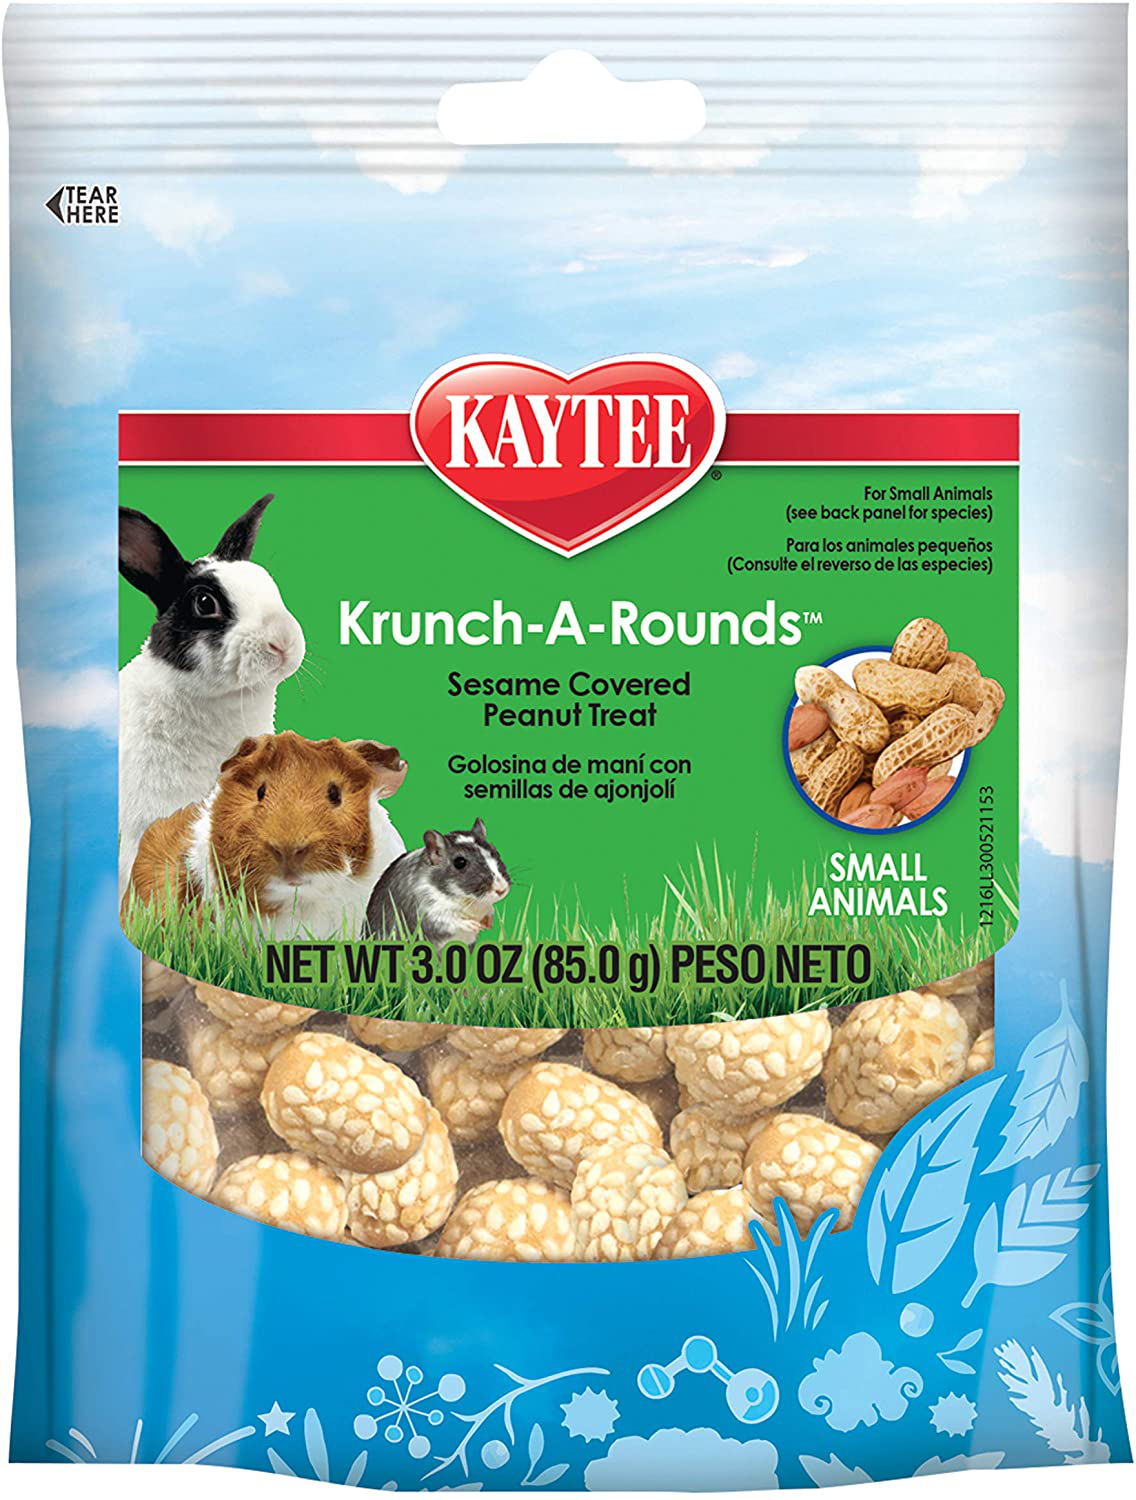 Kaytee Fiesta Krunch-A-Rounds with Peanut Center for All Small Animals